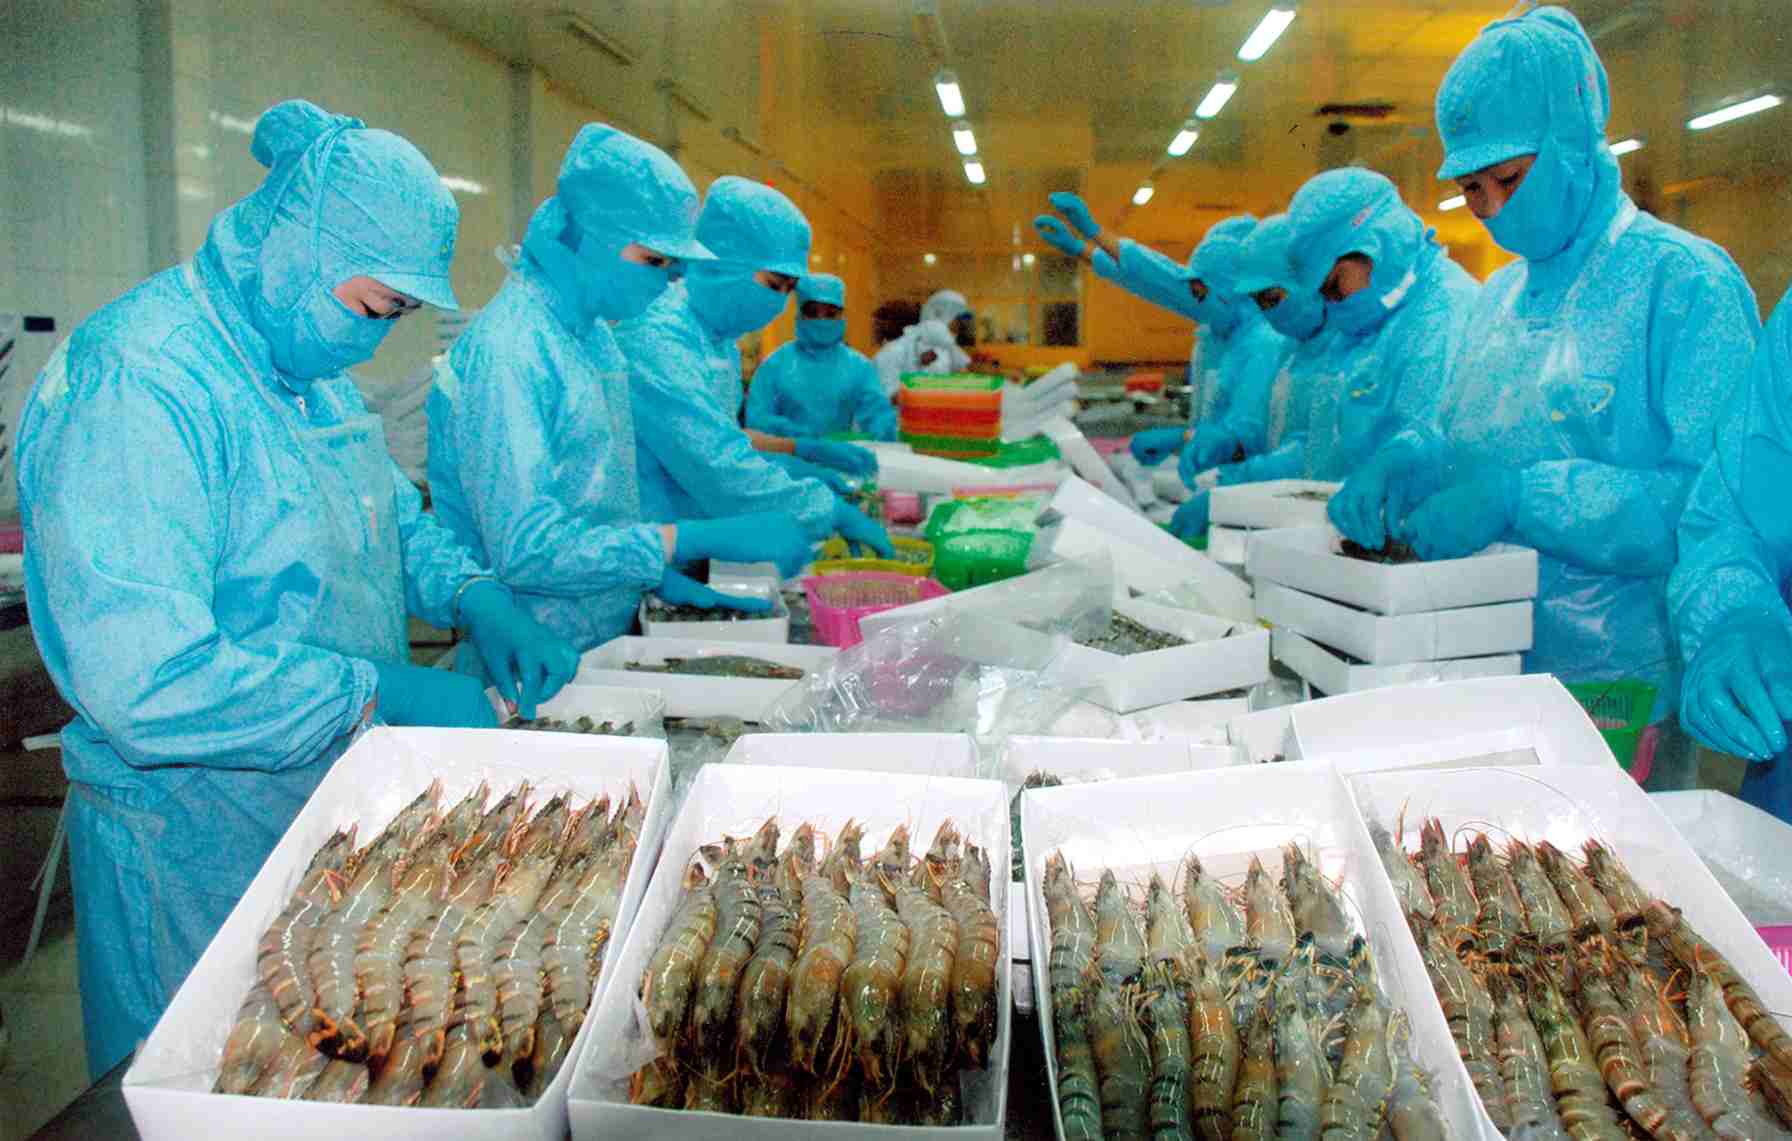 Amendments to standards for aquatic food safety inspectors for export in Vietnam